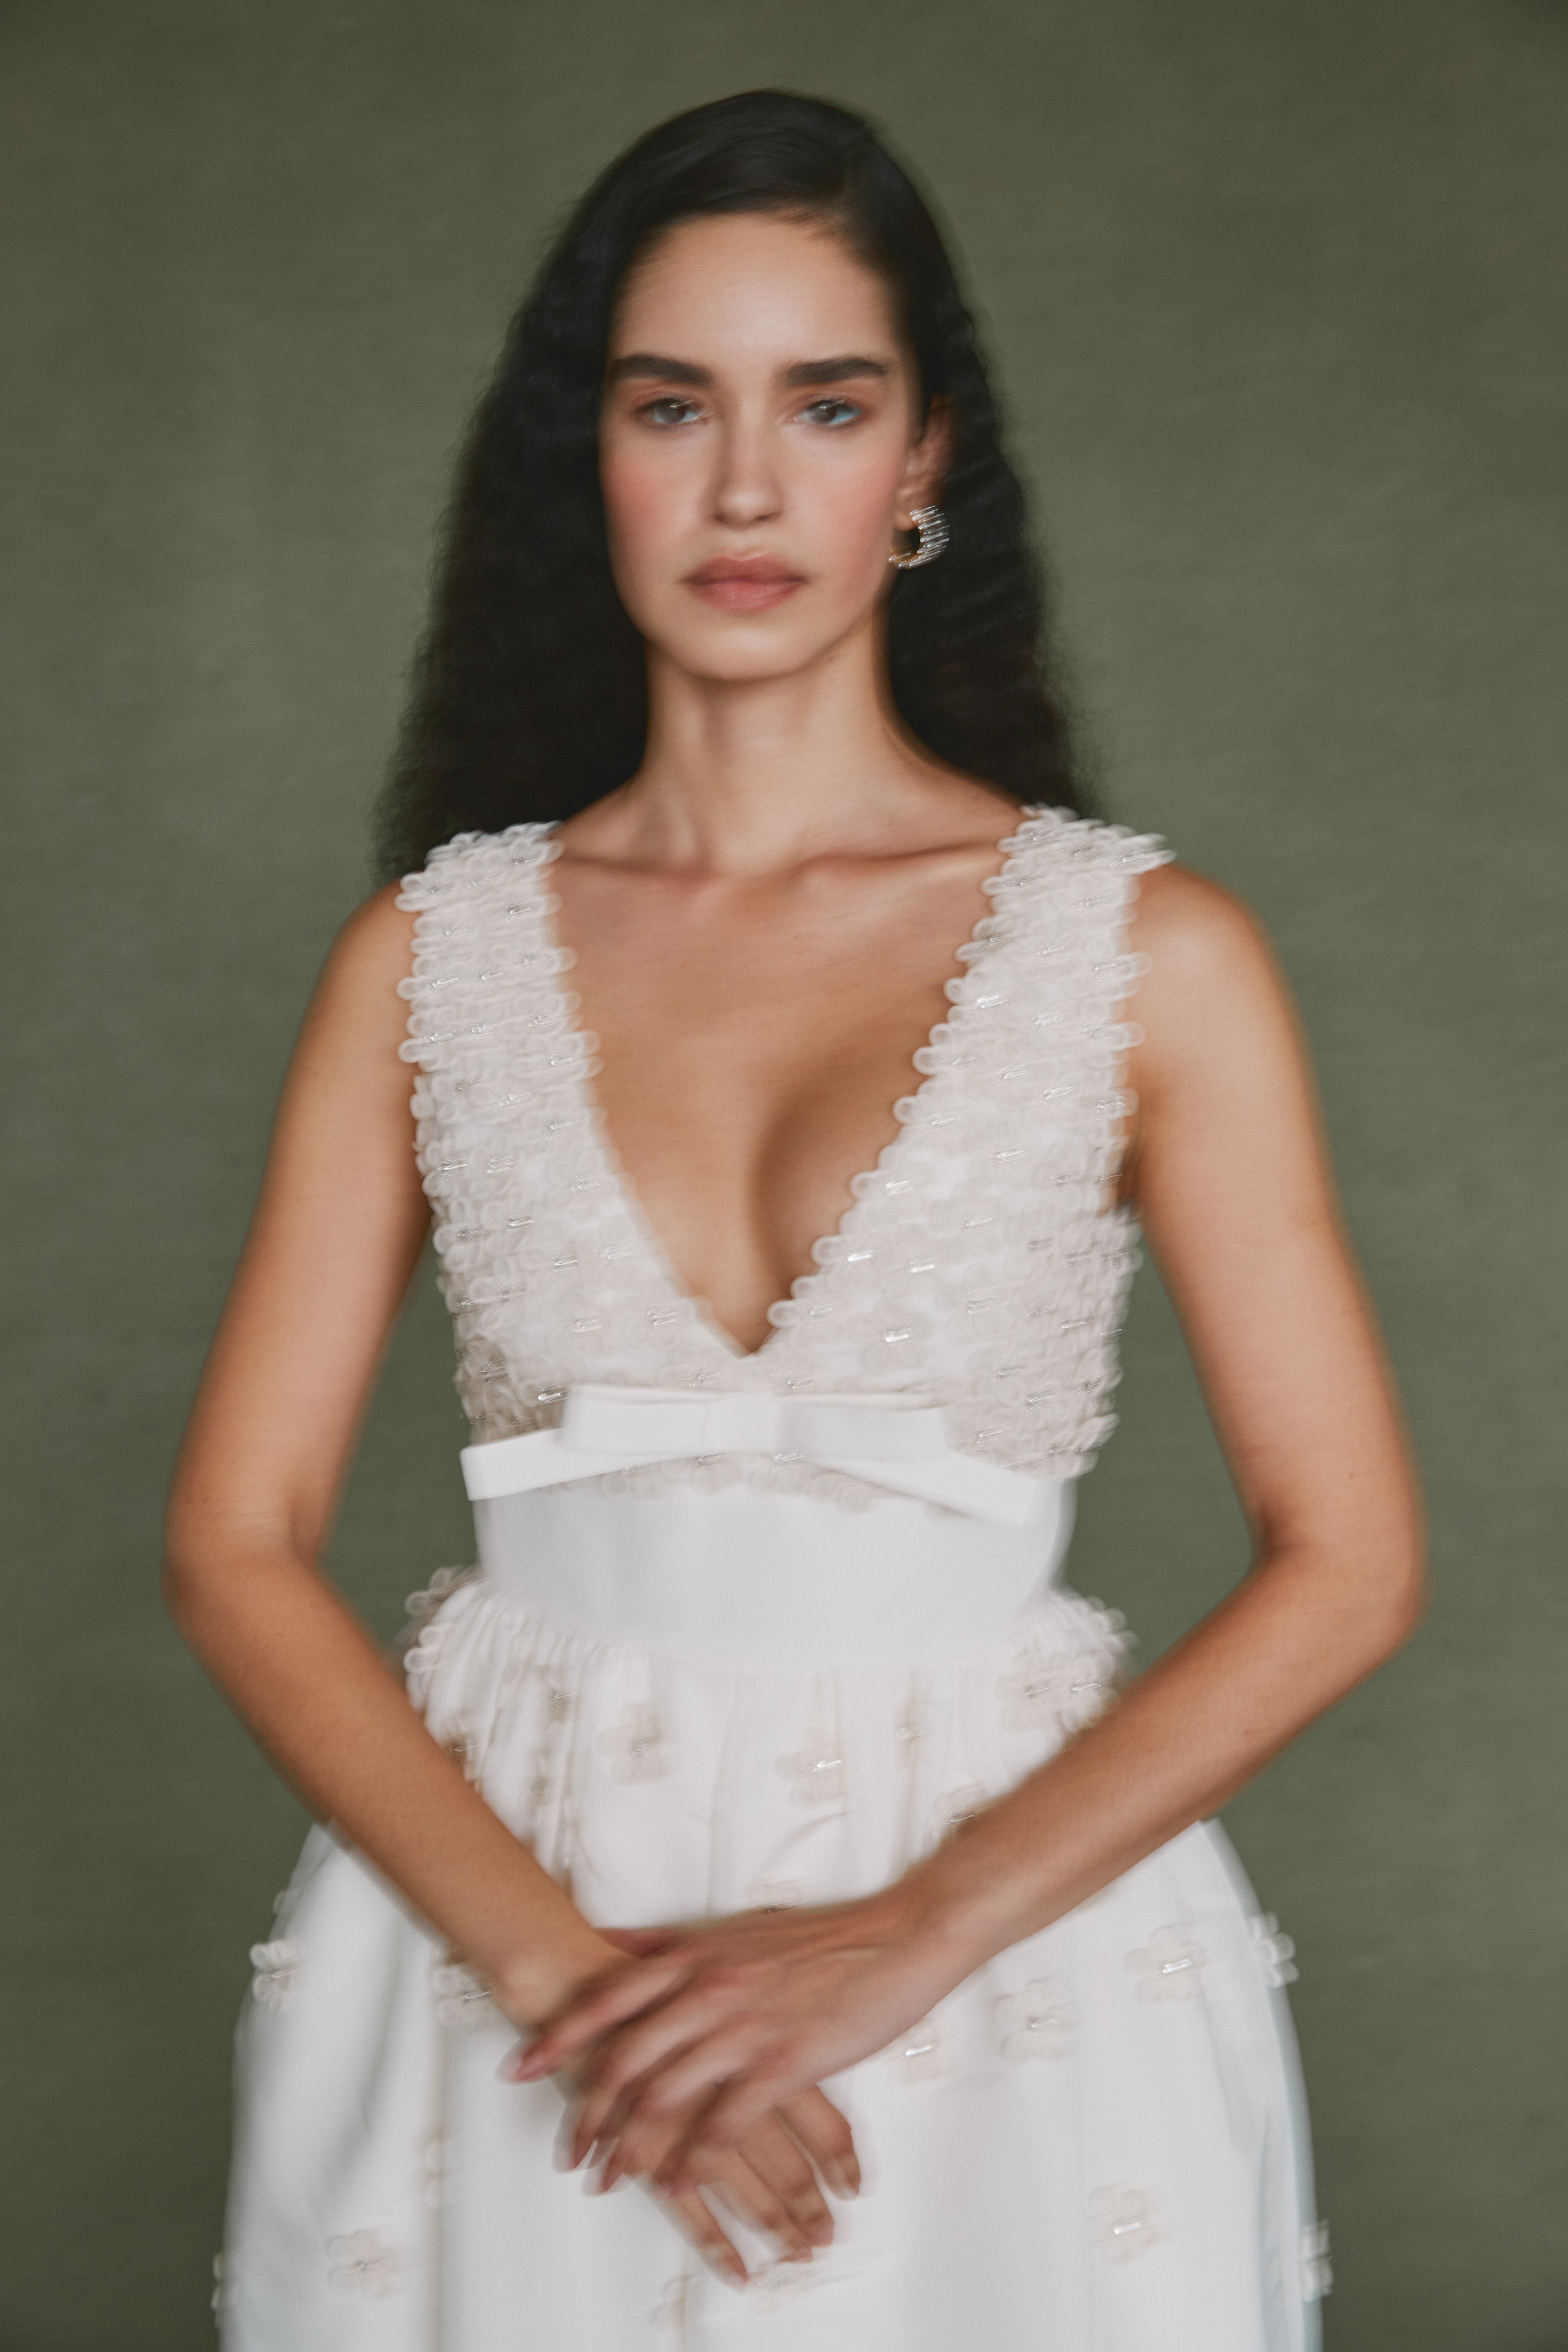 Alexandra Pijut Rainey Dress in ivory silk faille with bow and flower beading. Wedding dress, bridal, bride, rehearsal dinner, after party outfit. Ankle length.